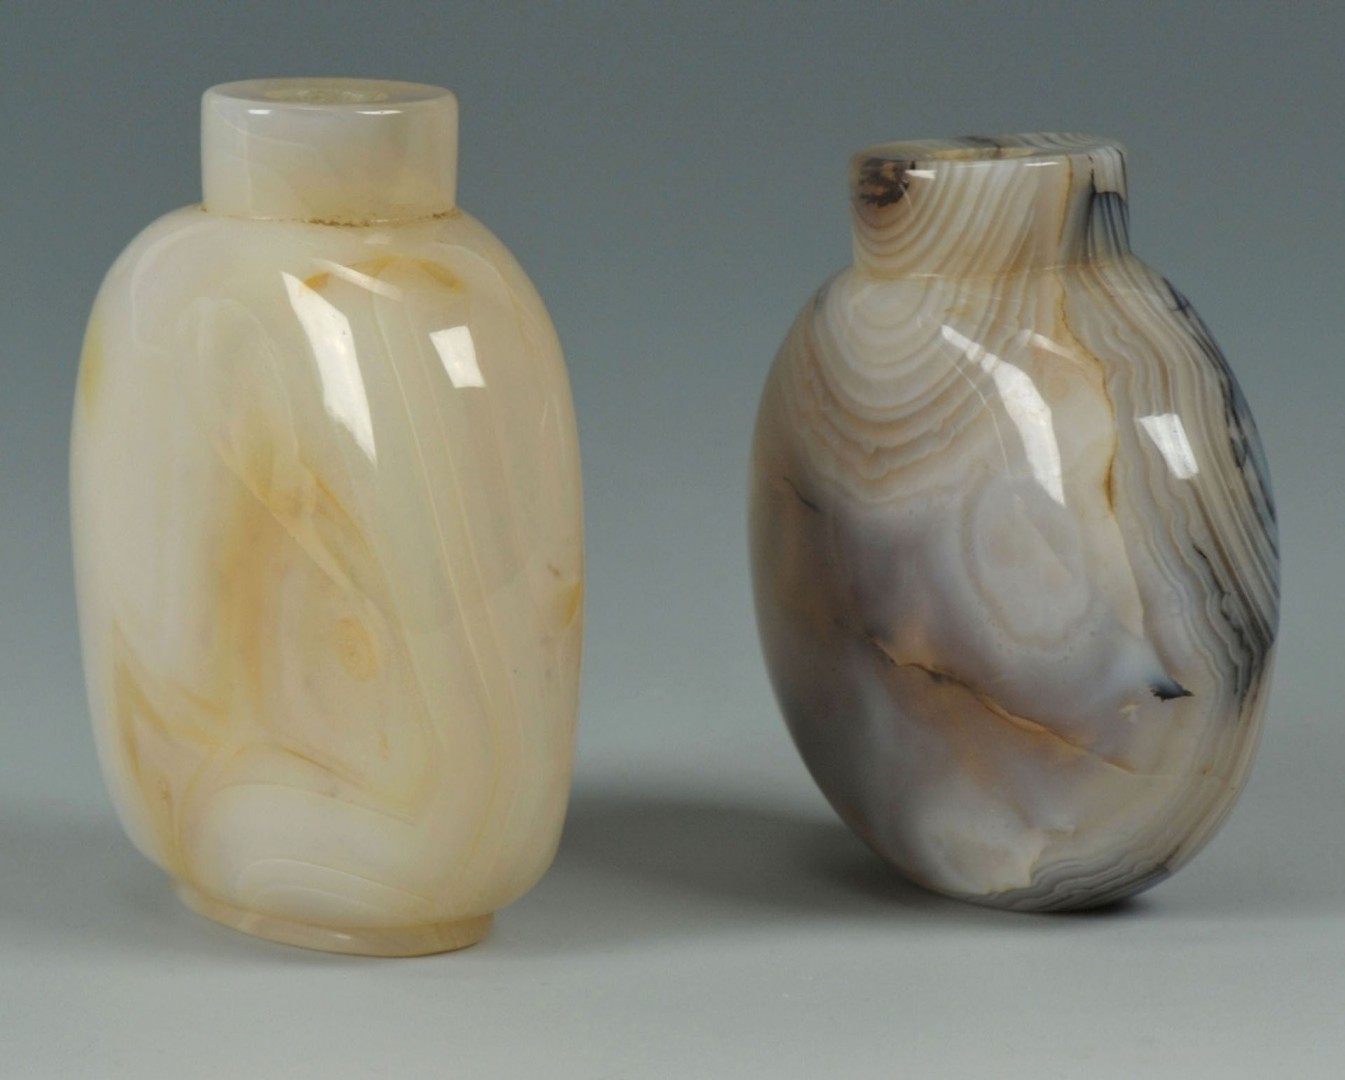 Lot 5: 3 Chinese Snuff Bottles, Jade & Agate